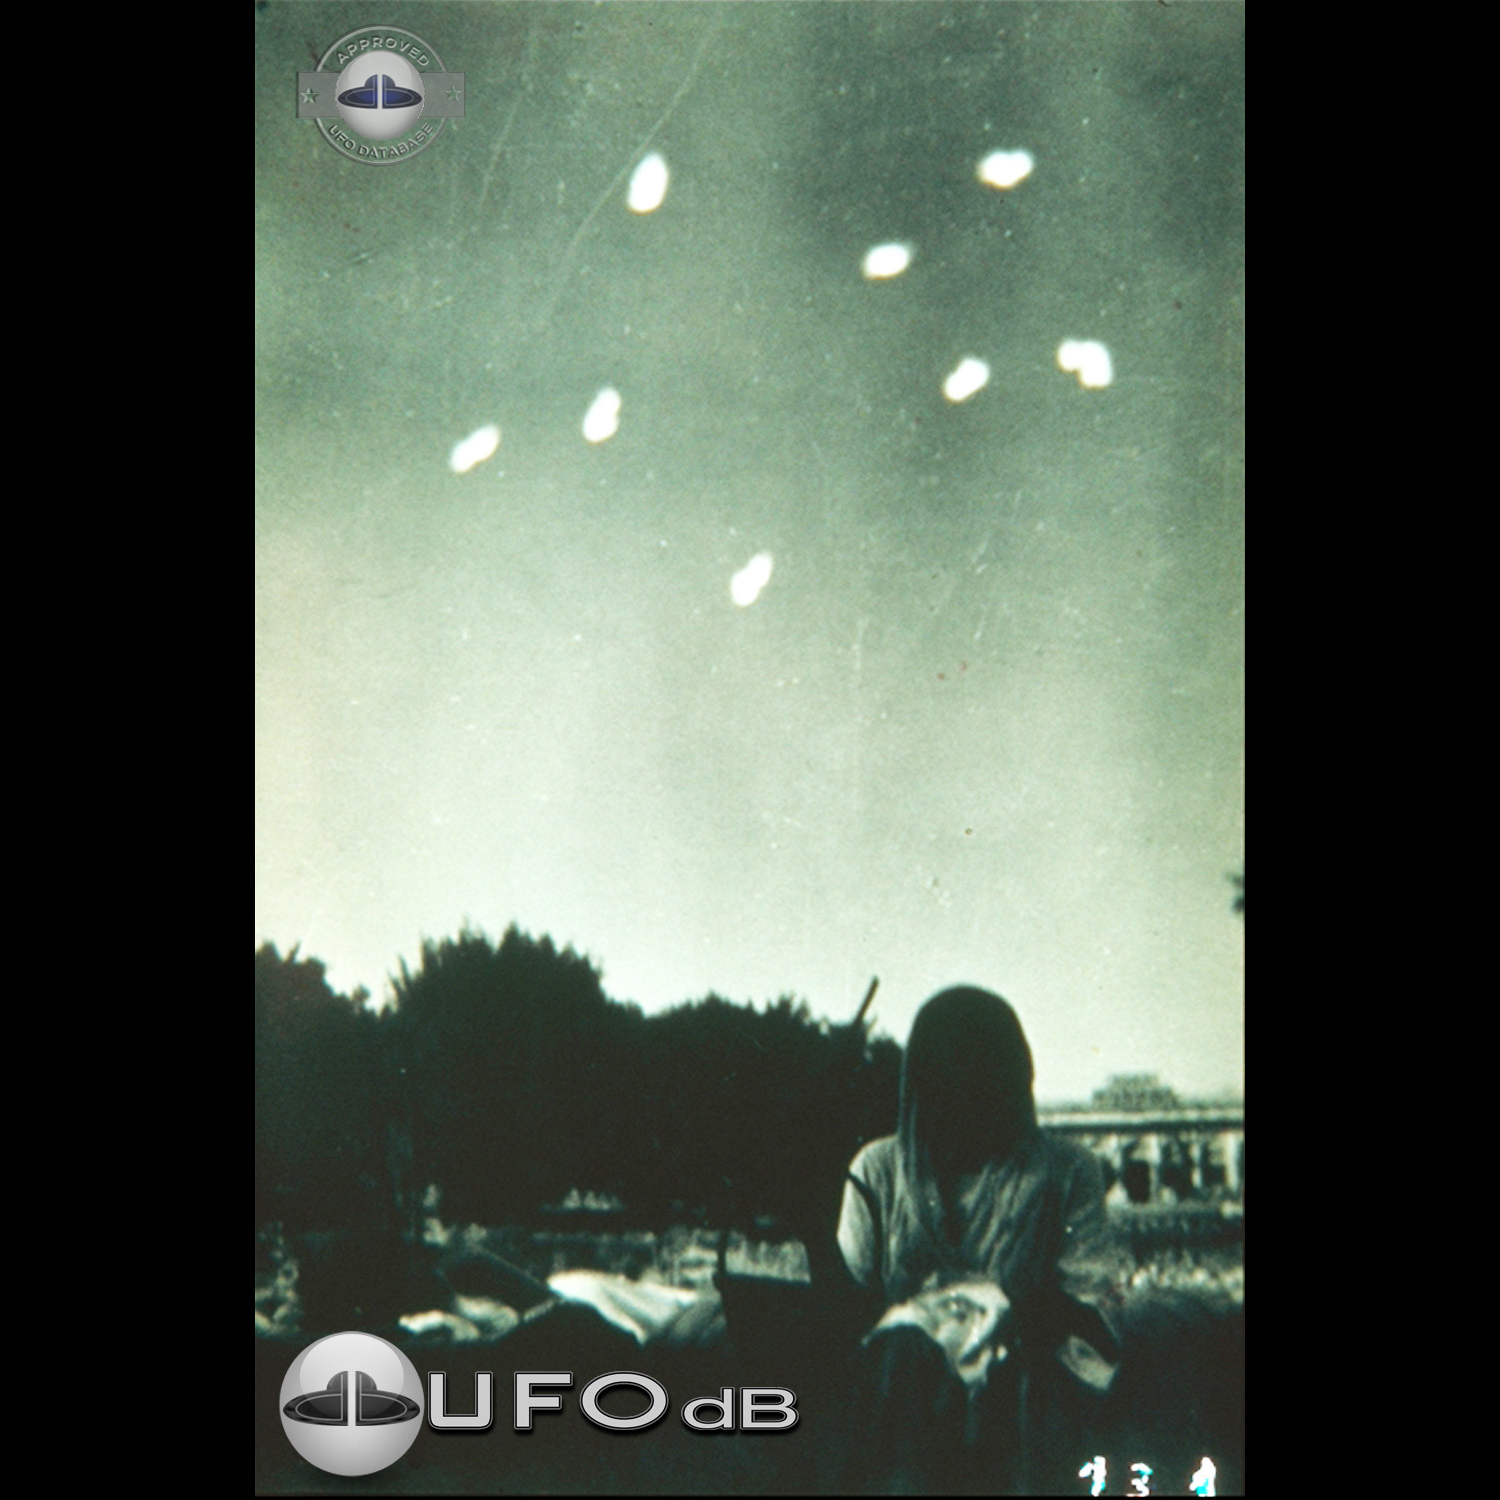 8 UFOs over Ashoka Ashram in Mehrauli India | 1964 | by Billy Meier UFO Picture #177-1